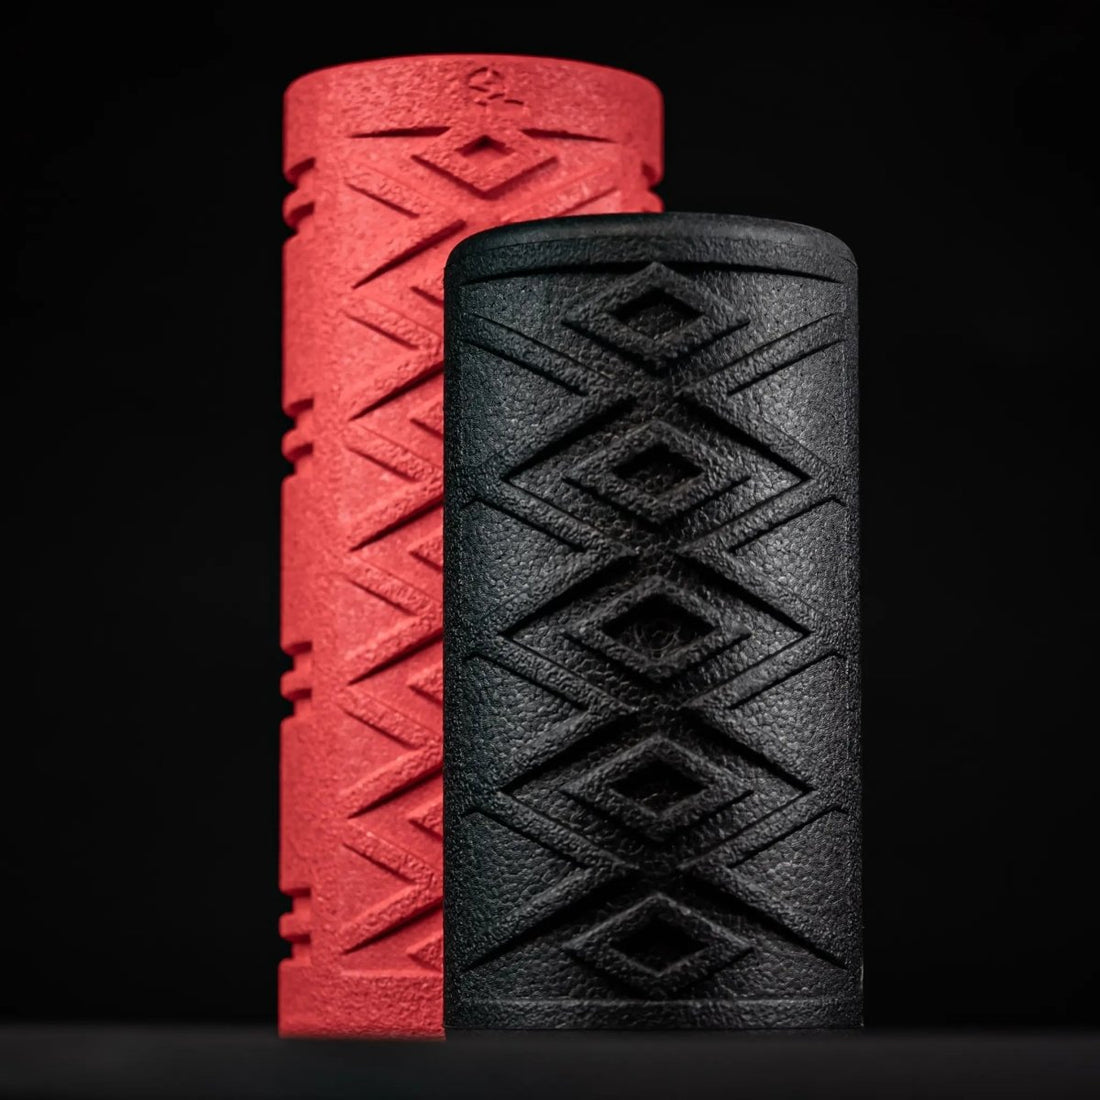 Vibrating Foam Roller for the IT Band - Pulseroll